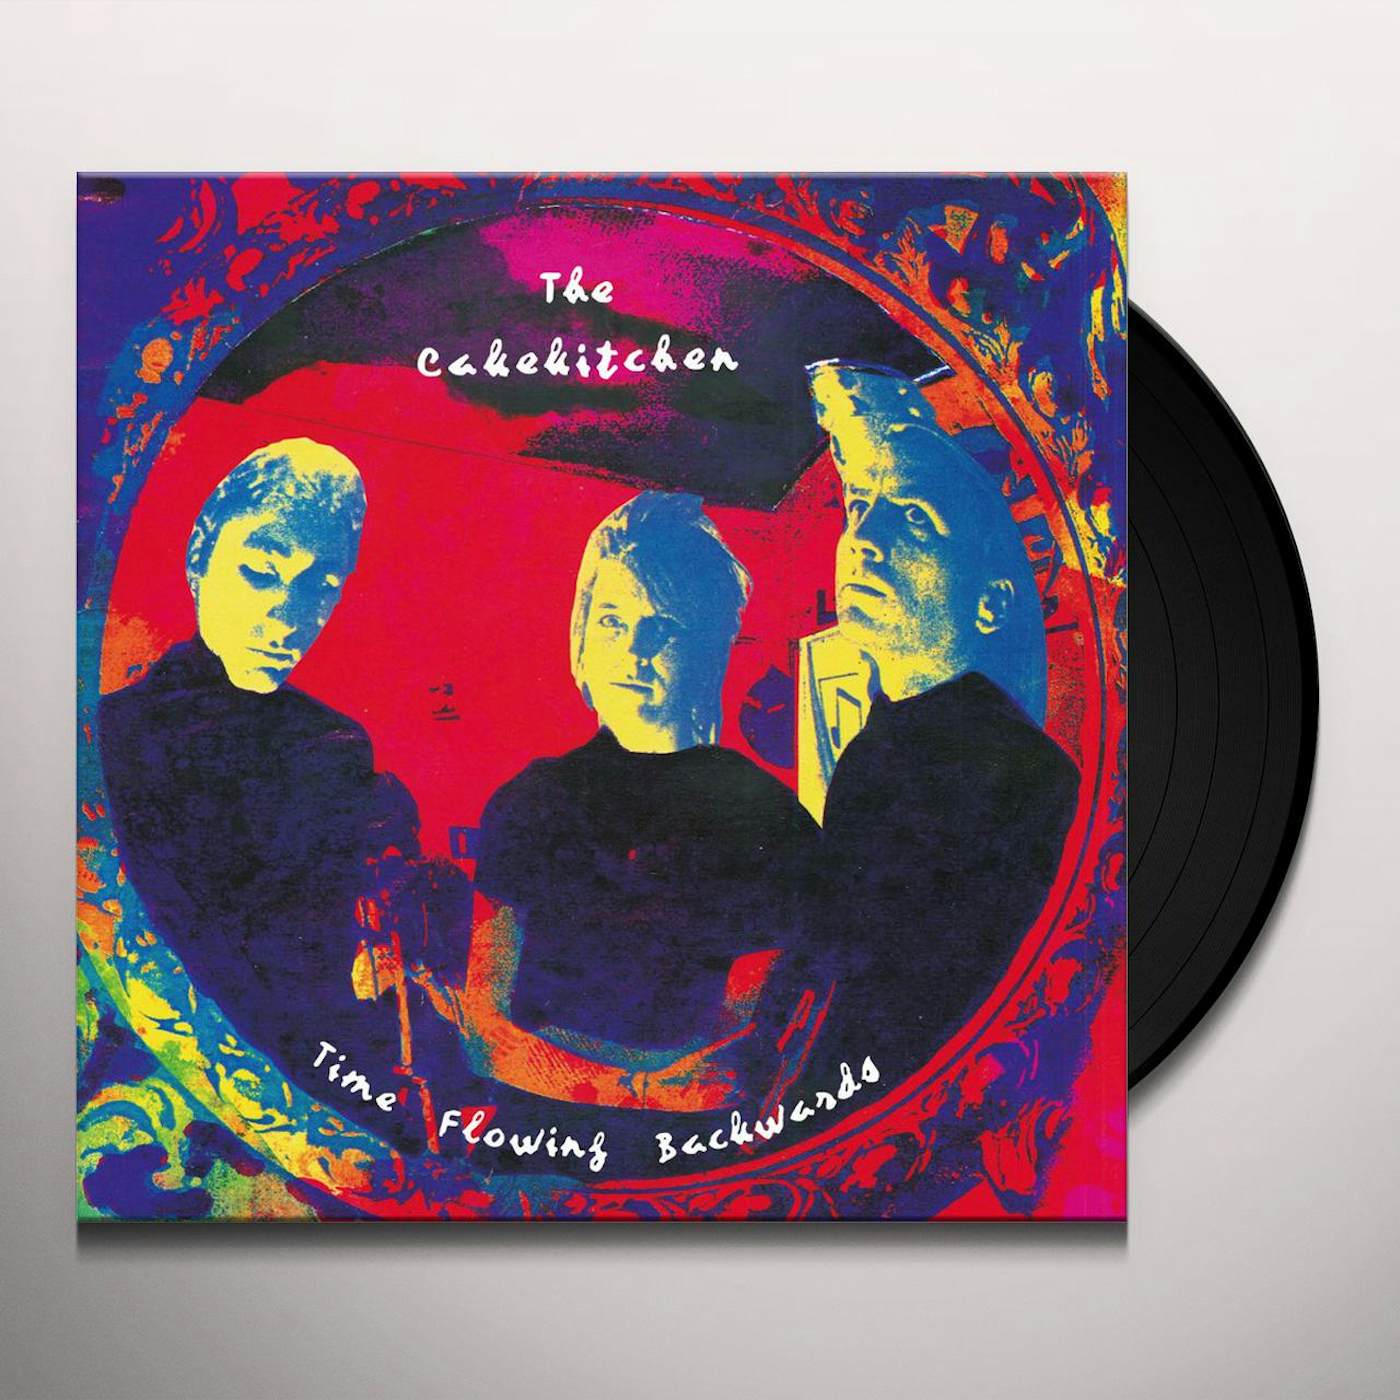 The Cakekitchen Time Flowing Backwards Vinyl Record